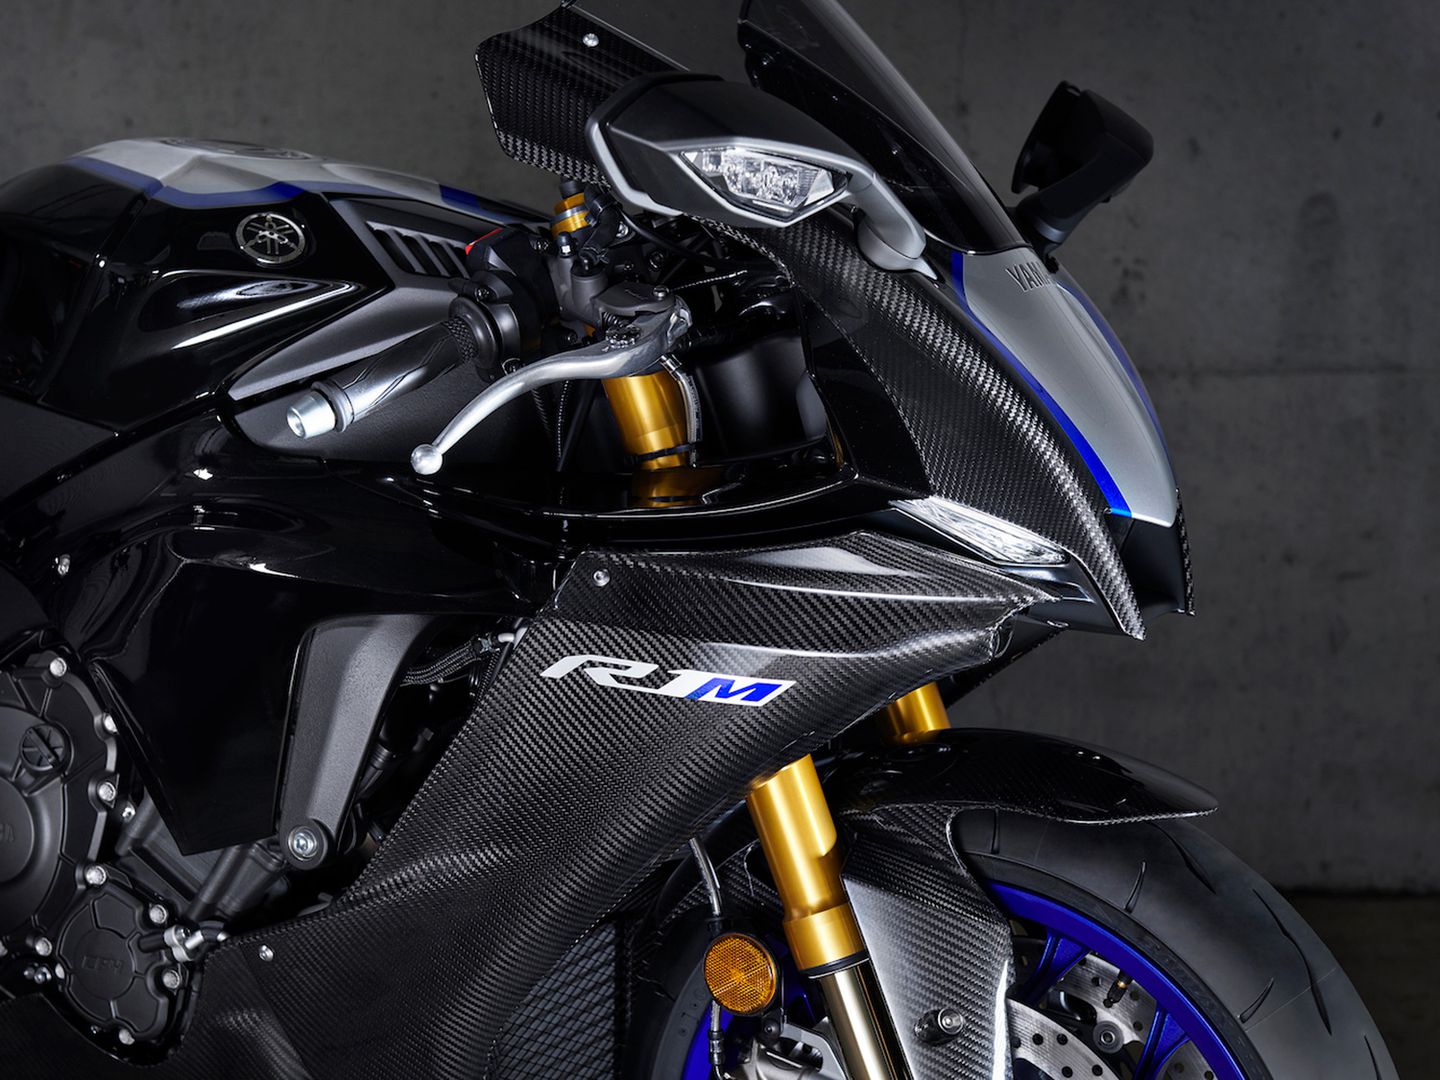 Yamaha YZF R1 And YZF R1M Technical Photo Gallery